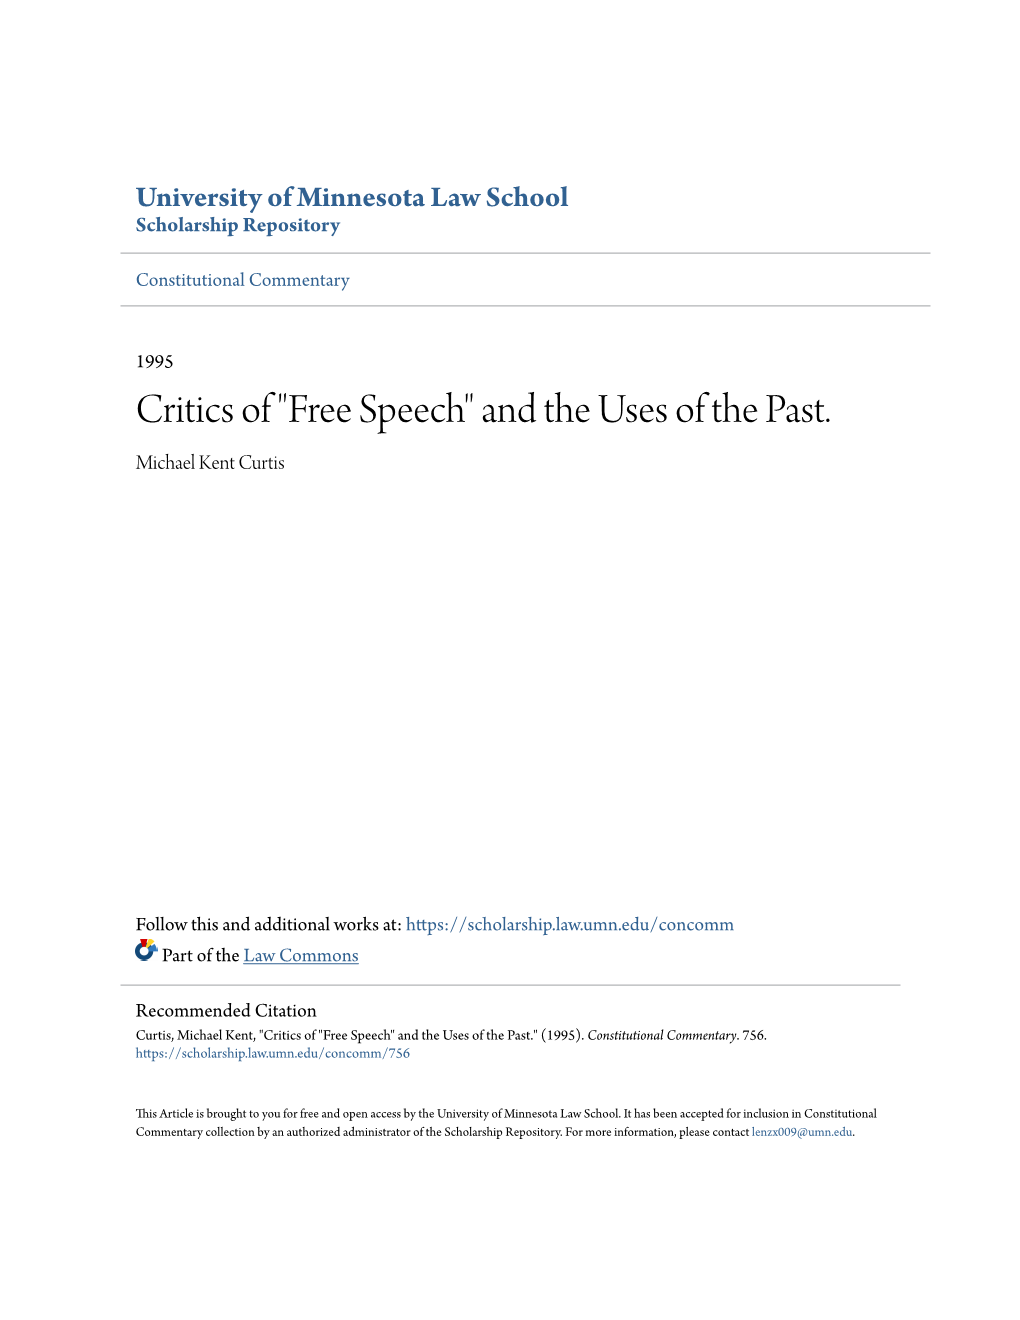 Free Speech" and the Uses of the Past